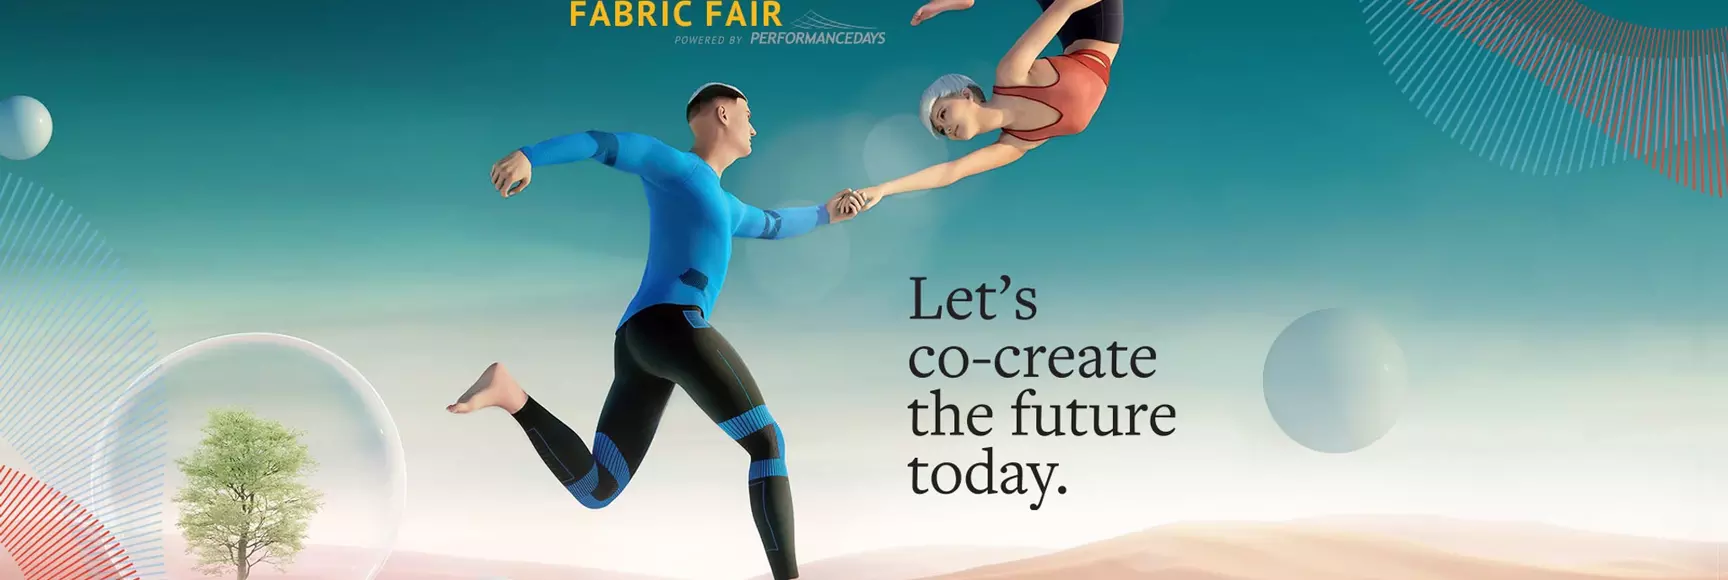 Image taken from a new CGI video promoting LYCRA® ADAPTIV fiber for activewear, sportswear and athleisure apparel.